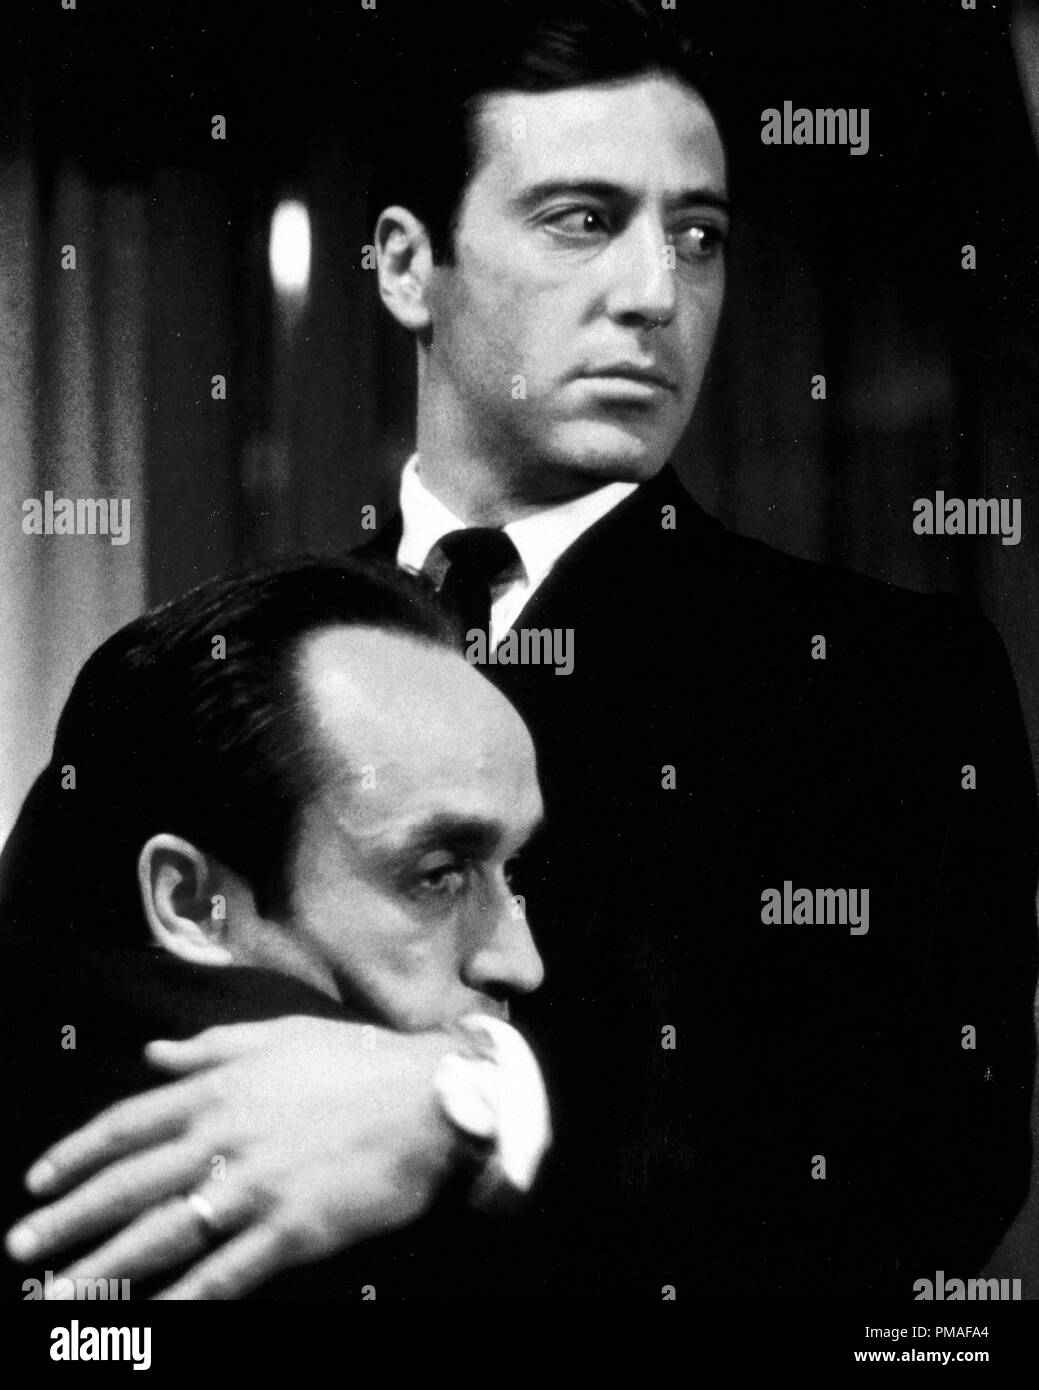 Al Pacino and John Cazale 'The Godfather: Part II' 1974 Paramount  File Reference # 32633 404THA Stock Photo